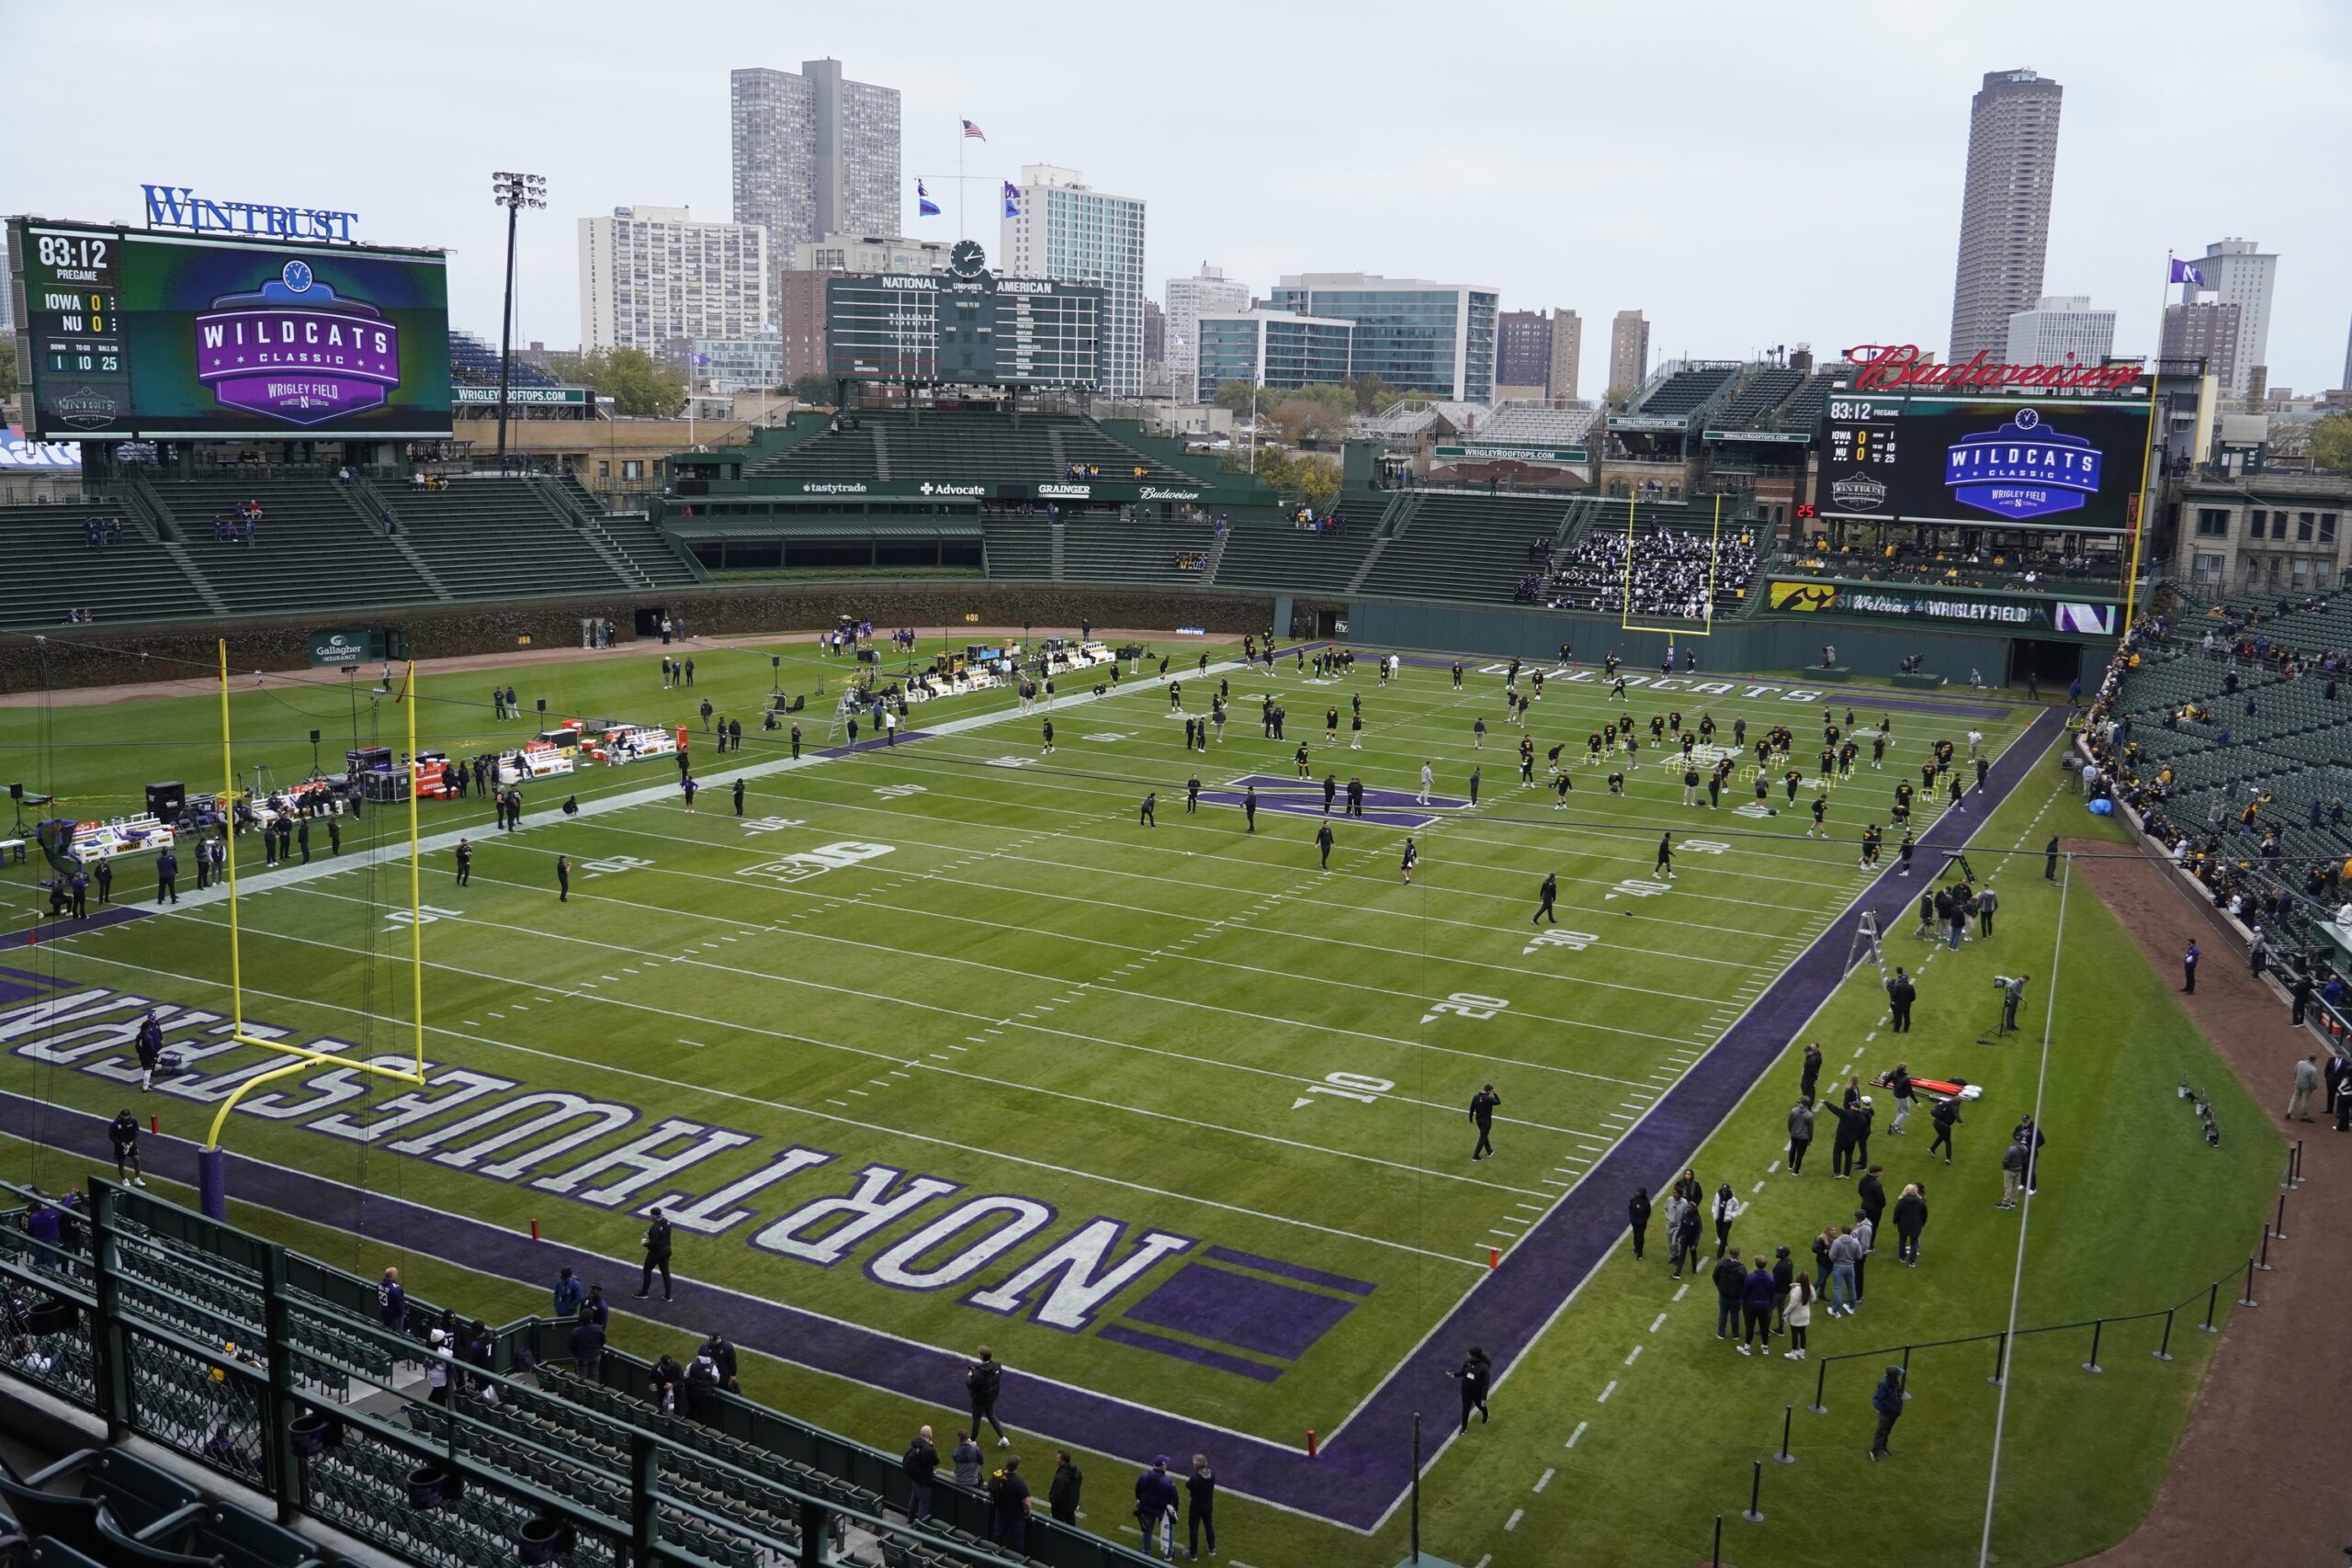 Temporarily Homeless Northwestern Announces Two Games at Wrigley